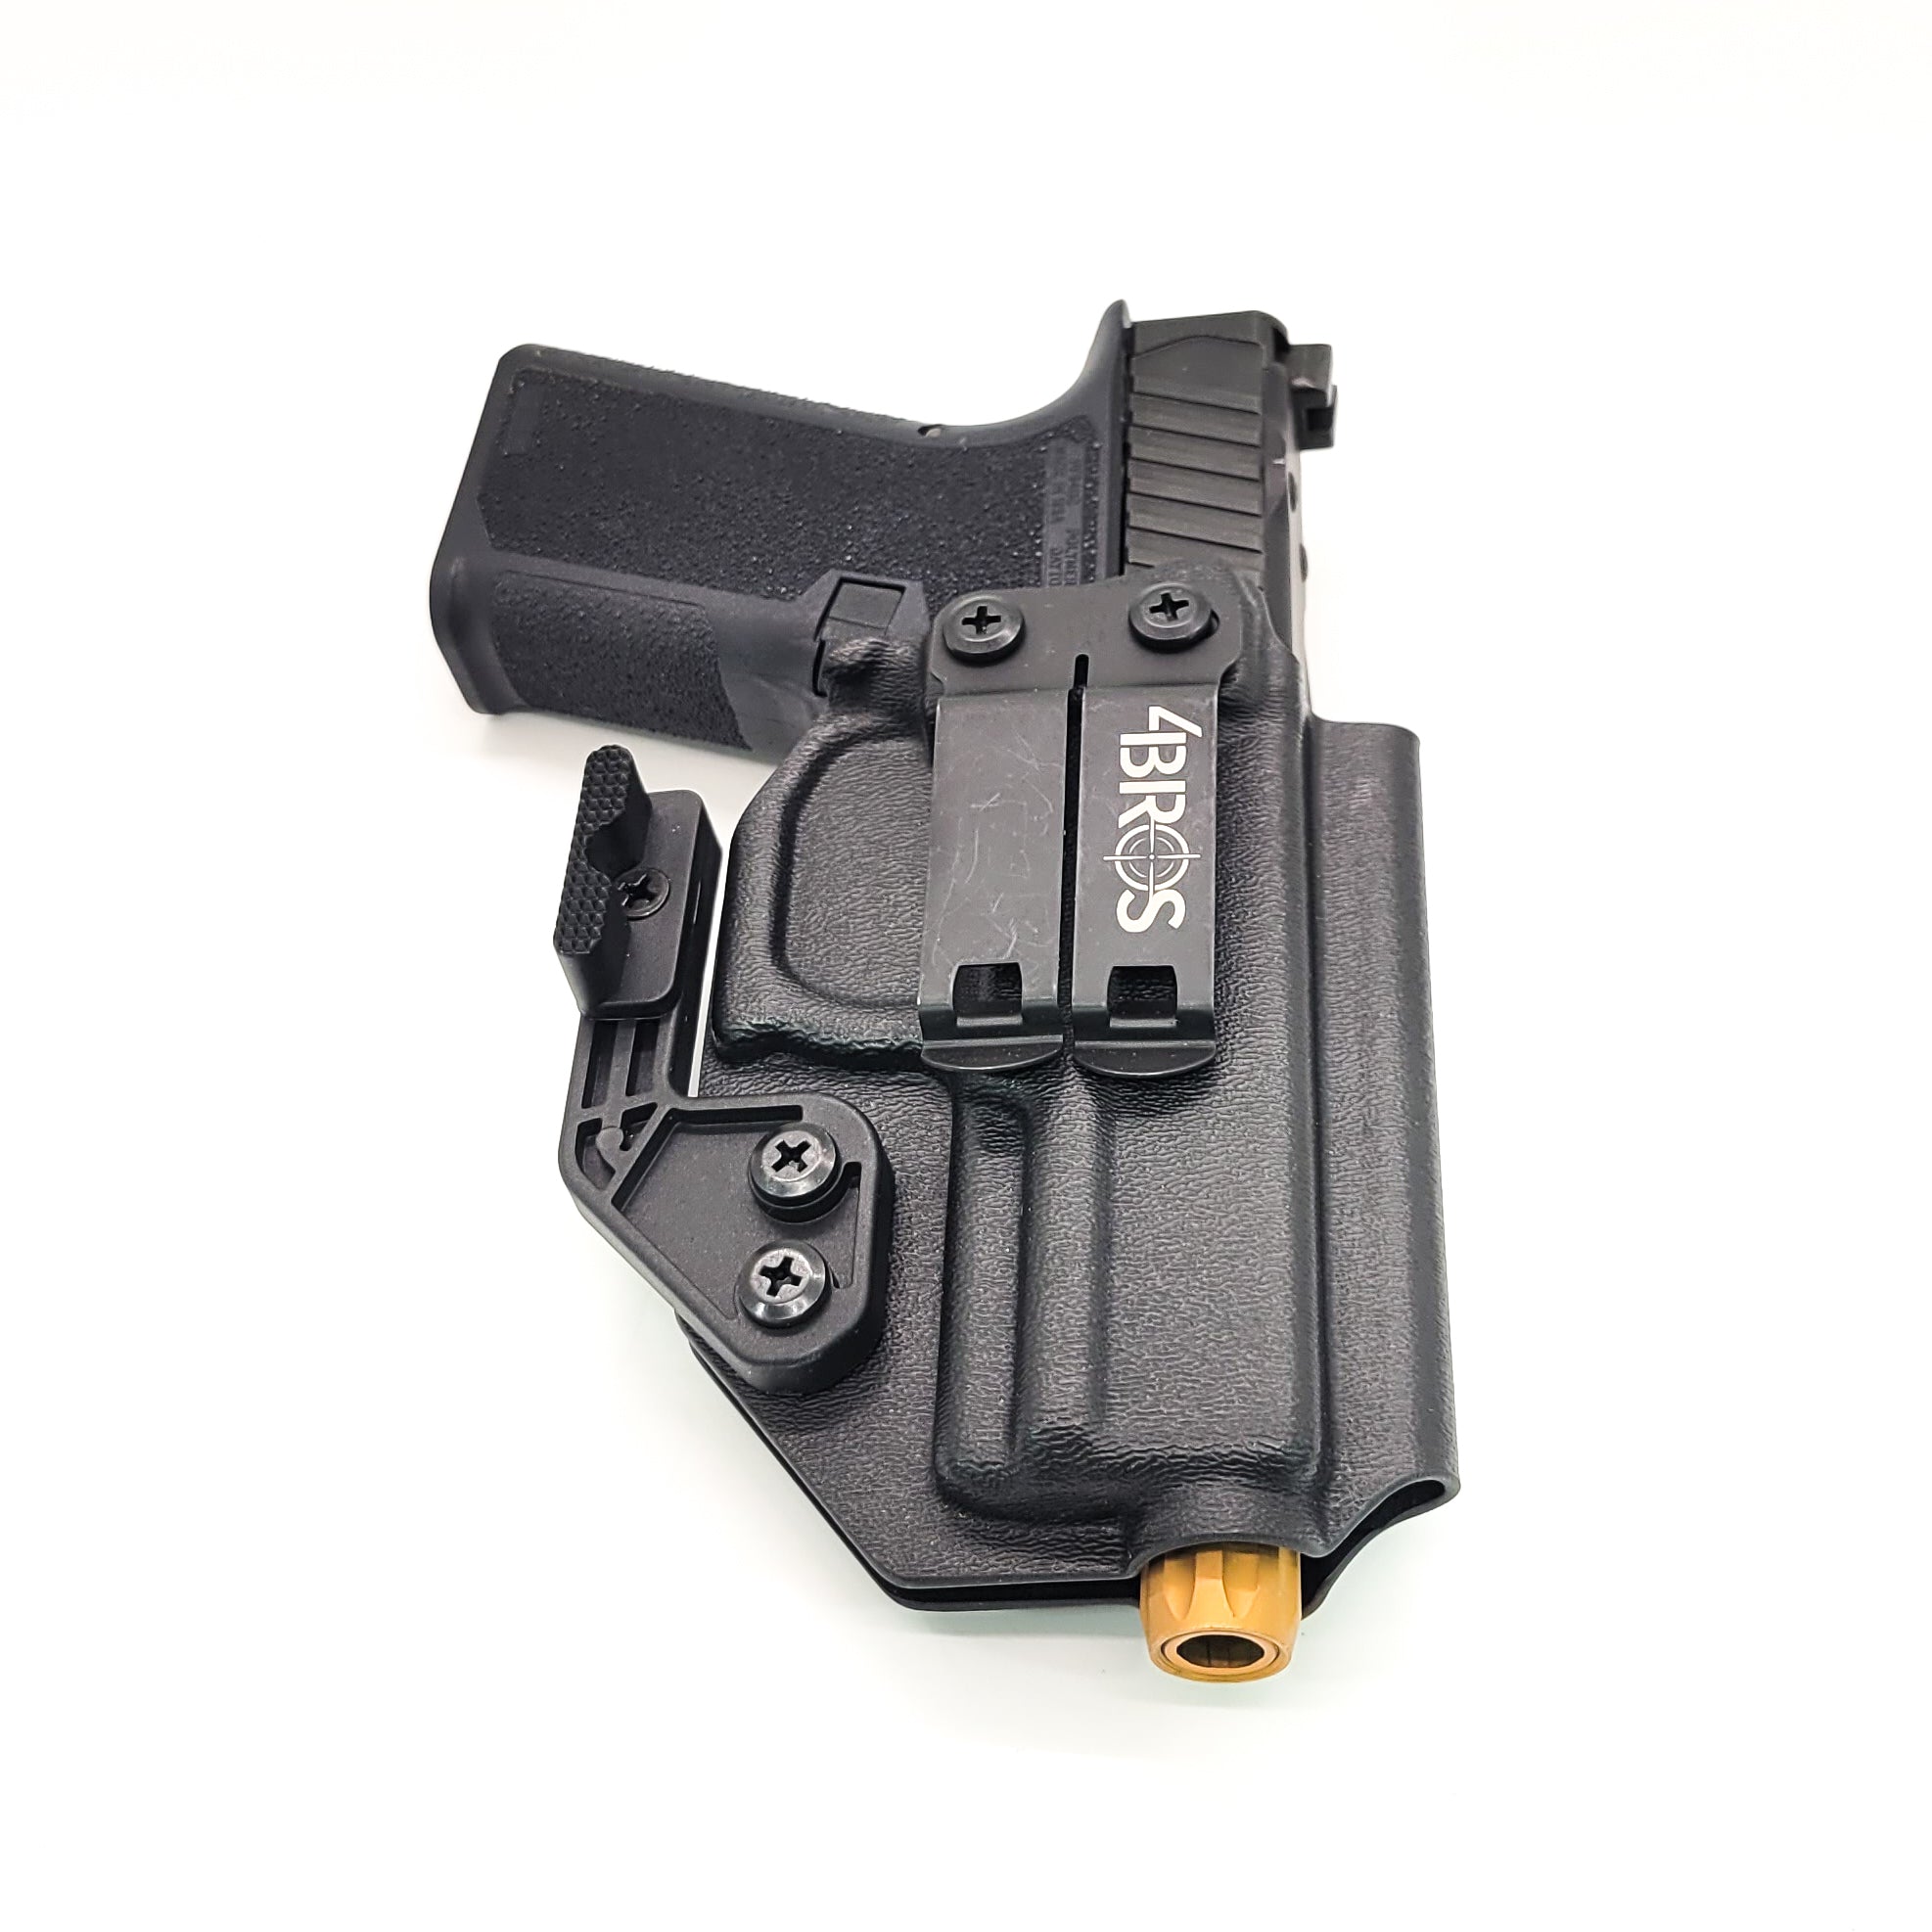 For the best, Inside Waistband IWB AIWB Appendix Kydex Holster designed to fit the Polymer80 PF940C pistol, shop Four Brothers 4BROS Holsters.  Adjustable retention, high sweat guard, formed accommodates threaded barrels and most red dot sights. Made in the USA 